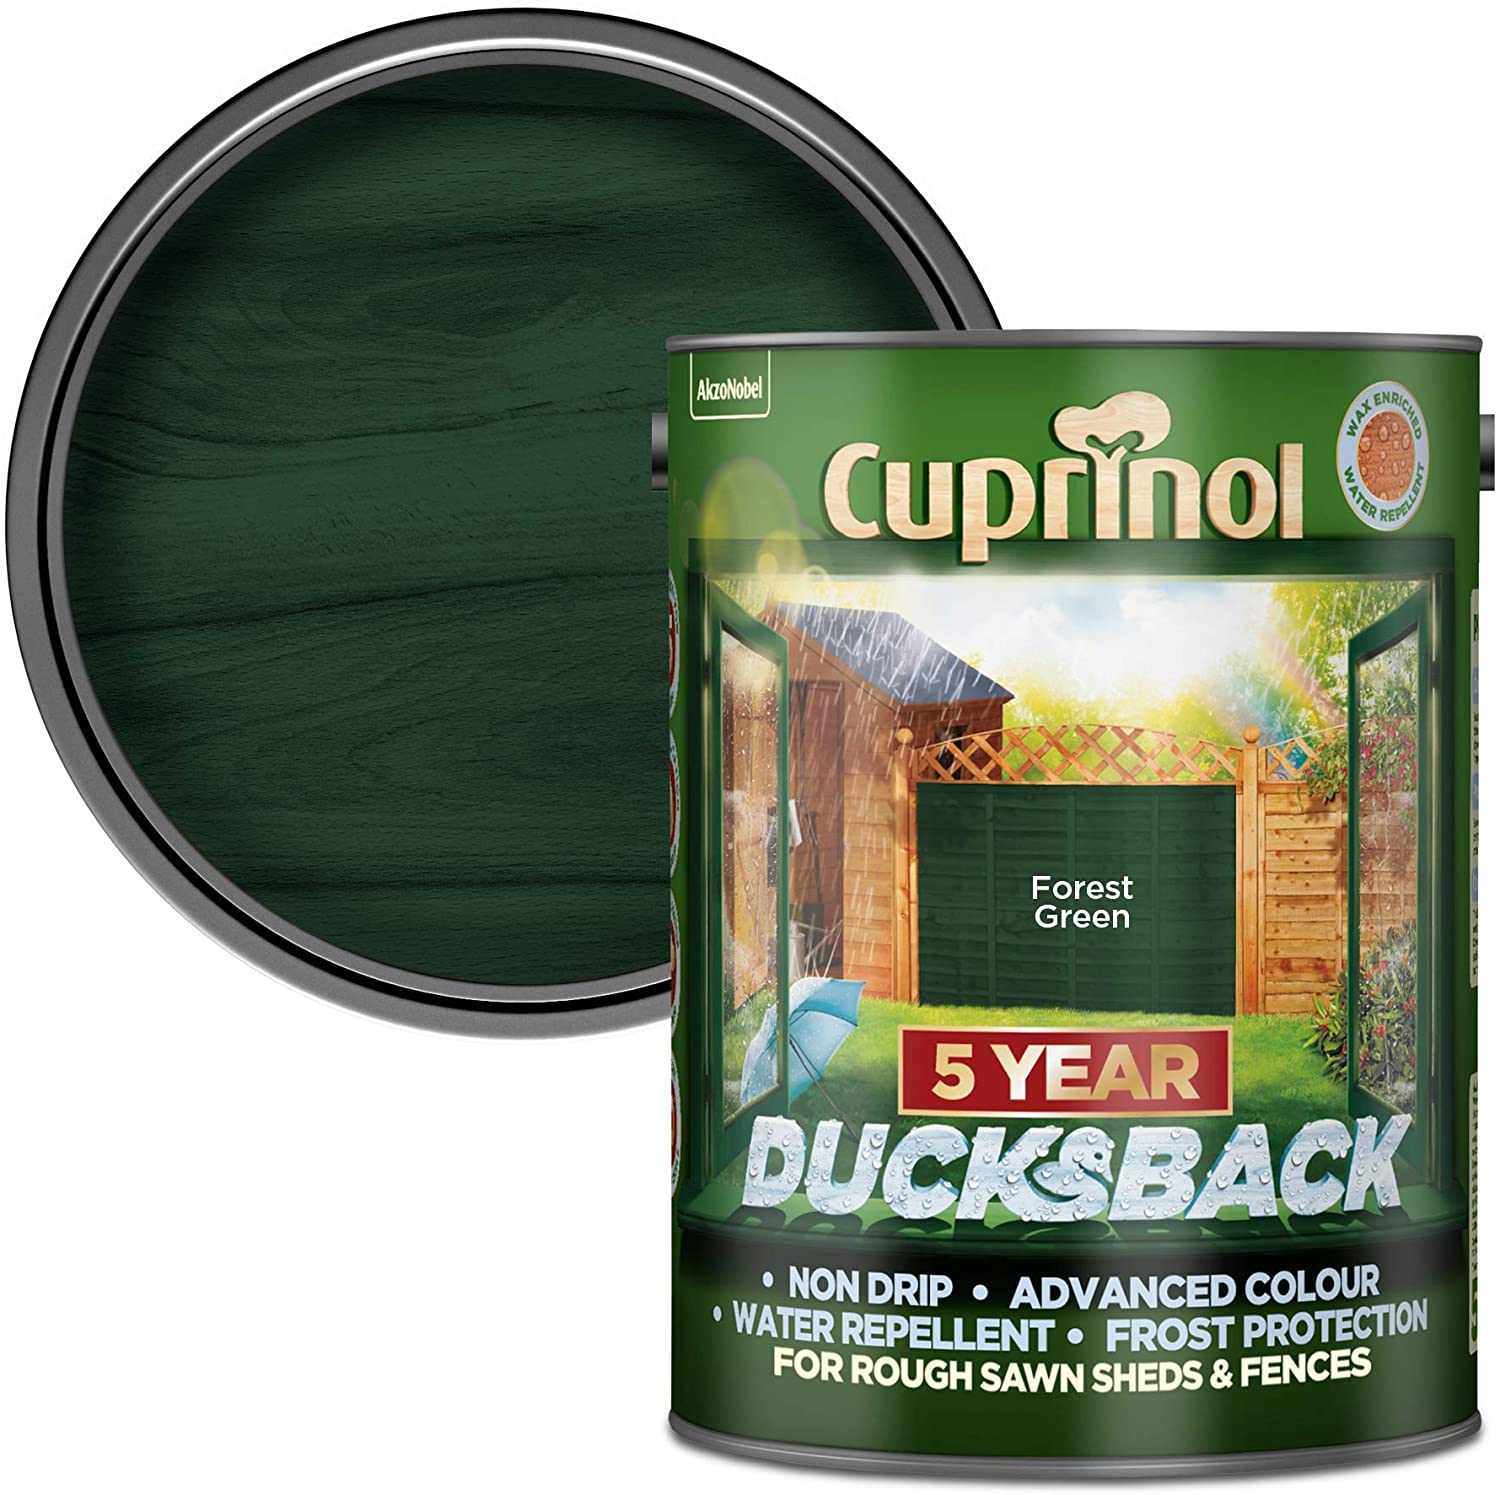 Cuprinol-Ducksback-5-Year-Waterproof-for-Sheds-and-Fence-Forest-Green-5-Litre